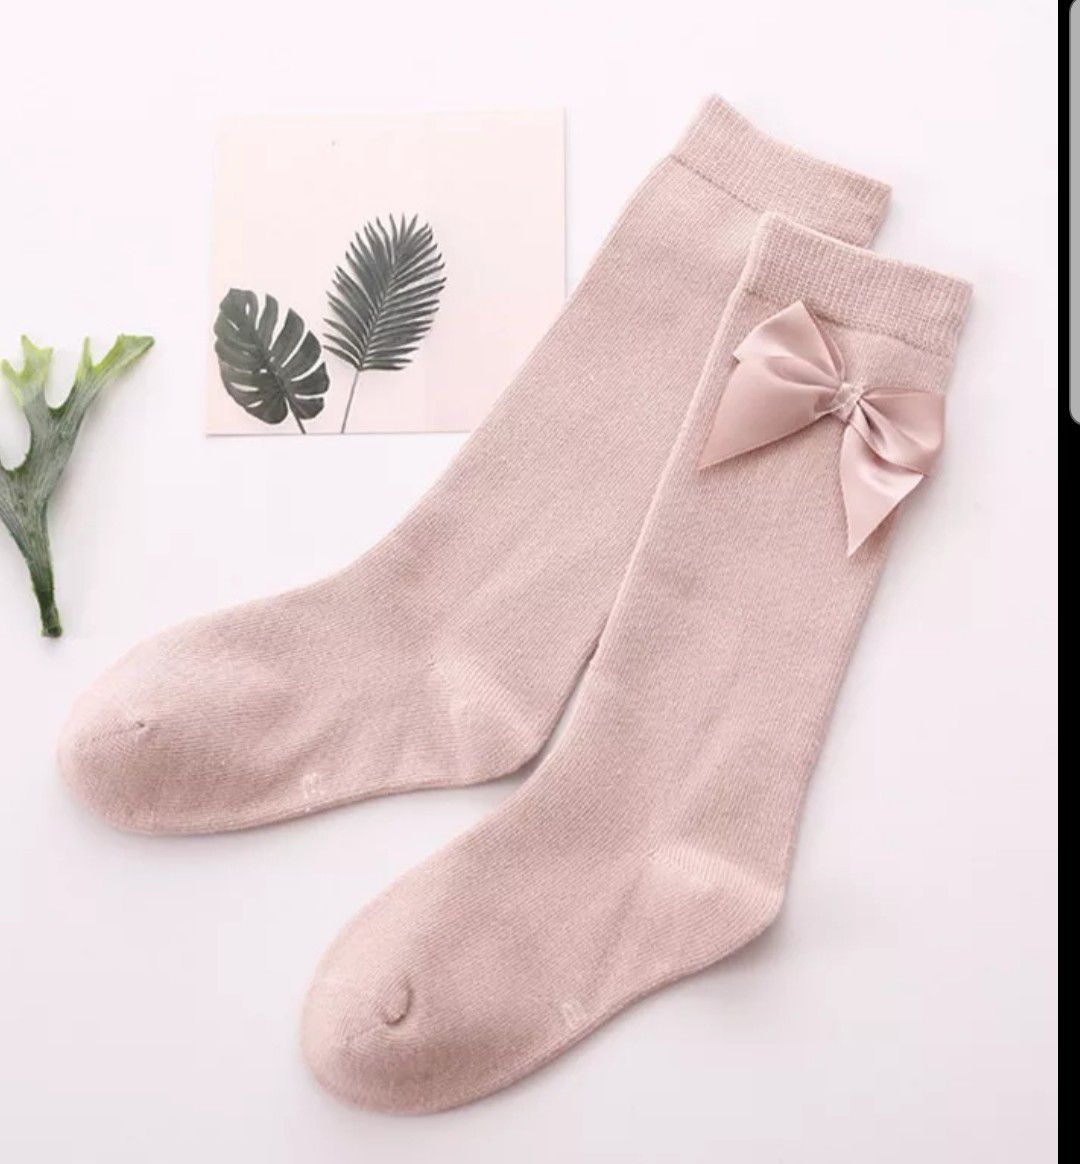 Baby Toddler soft nude rose color stocking socks